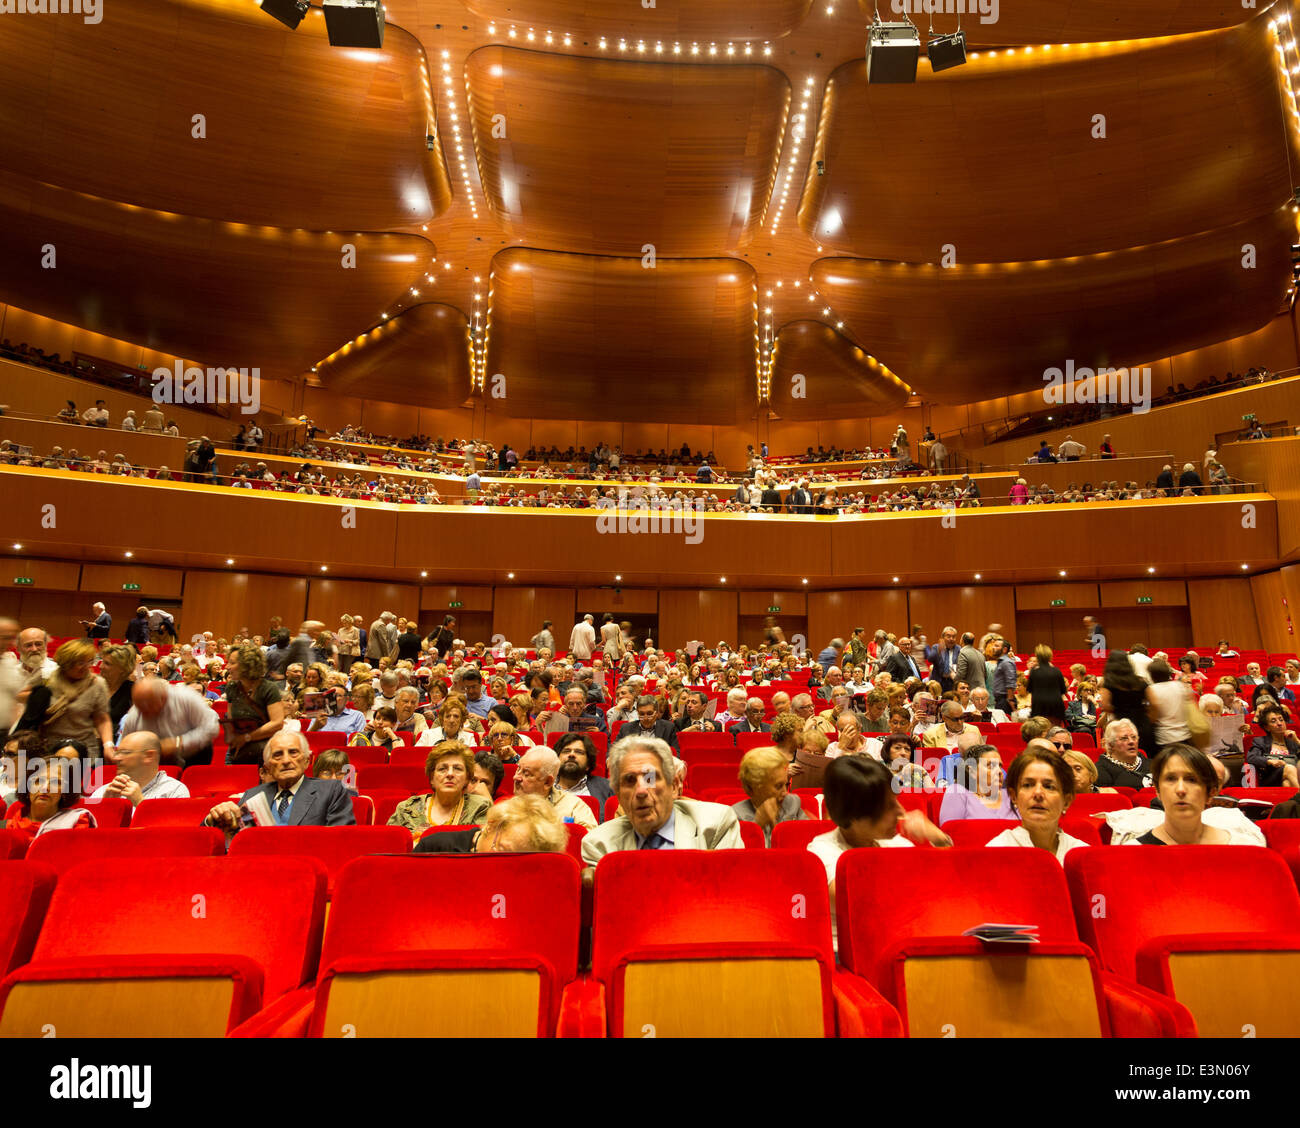 audience for a classical music concert at the Parco della Musica auditorium, Rome, Italy Stock Photo